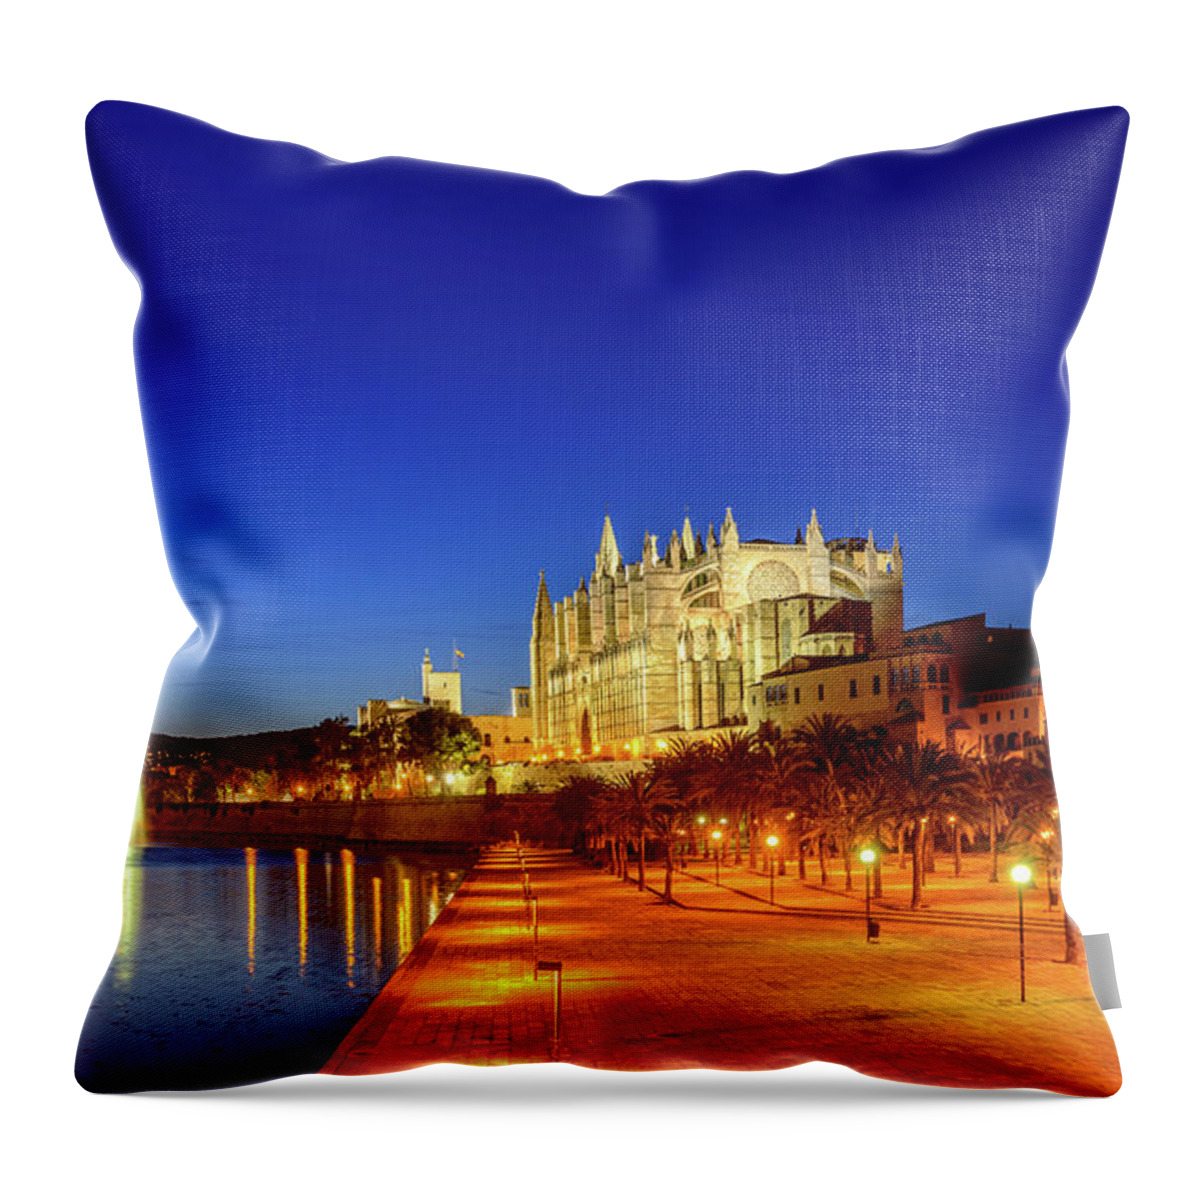 Panoramic Throw Pillow featuring the photograph La Seu - Cathedral Of Palma De Mallorca by Juergen Sack